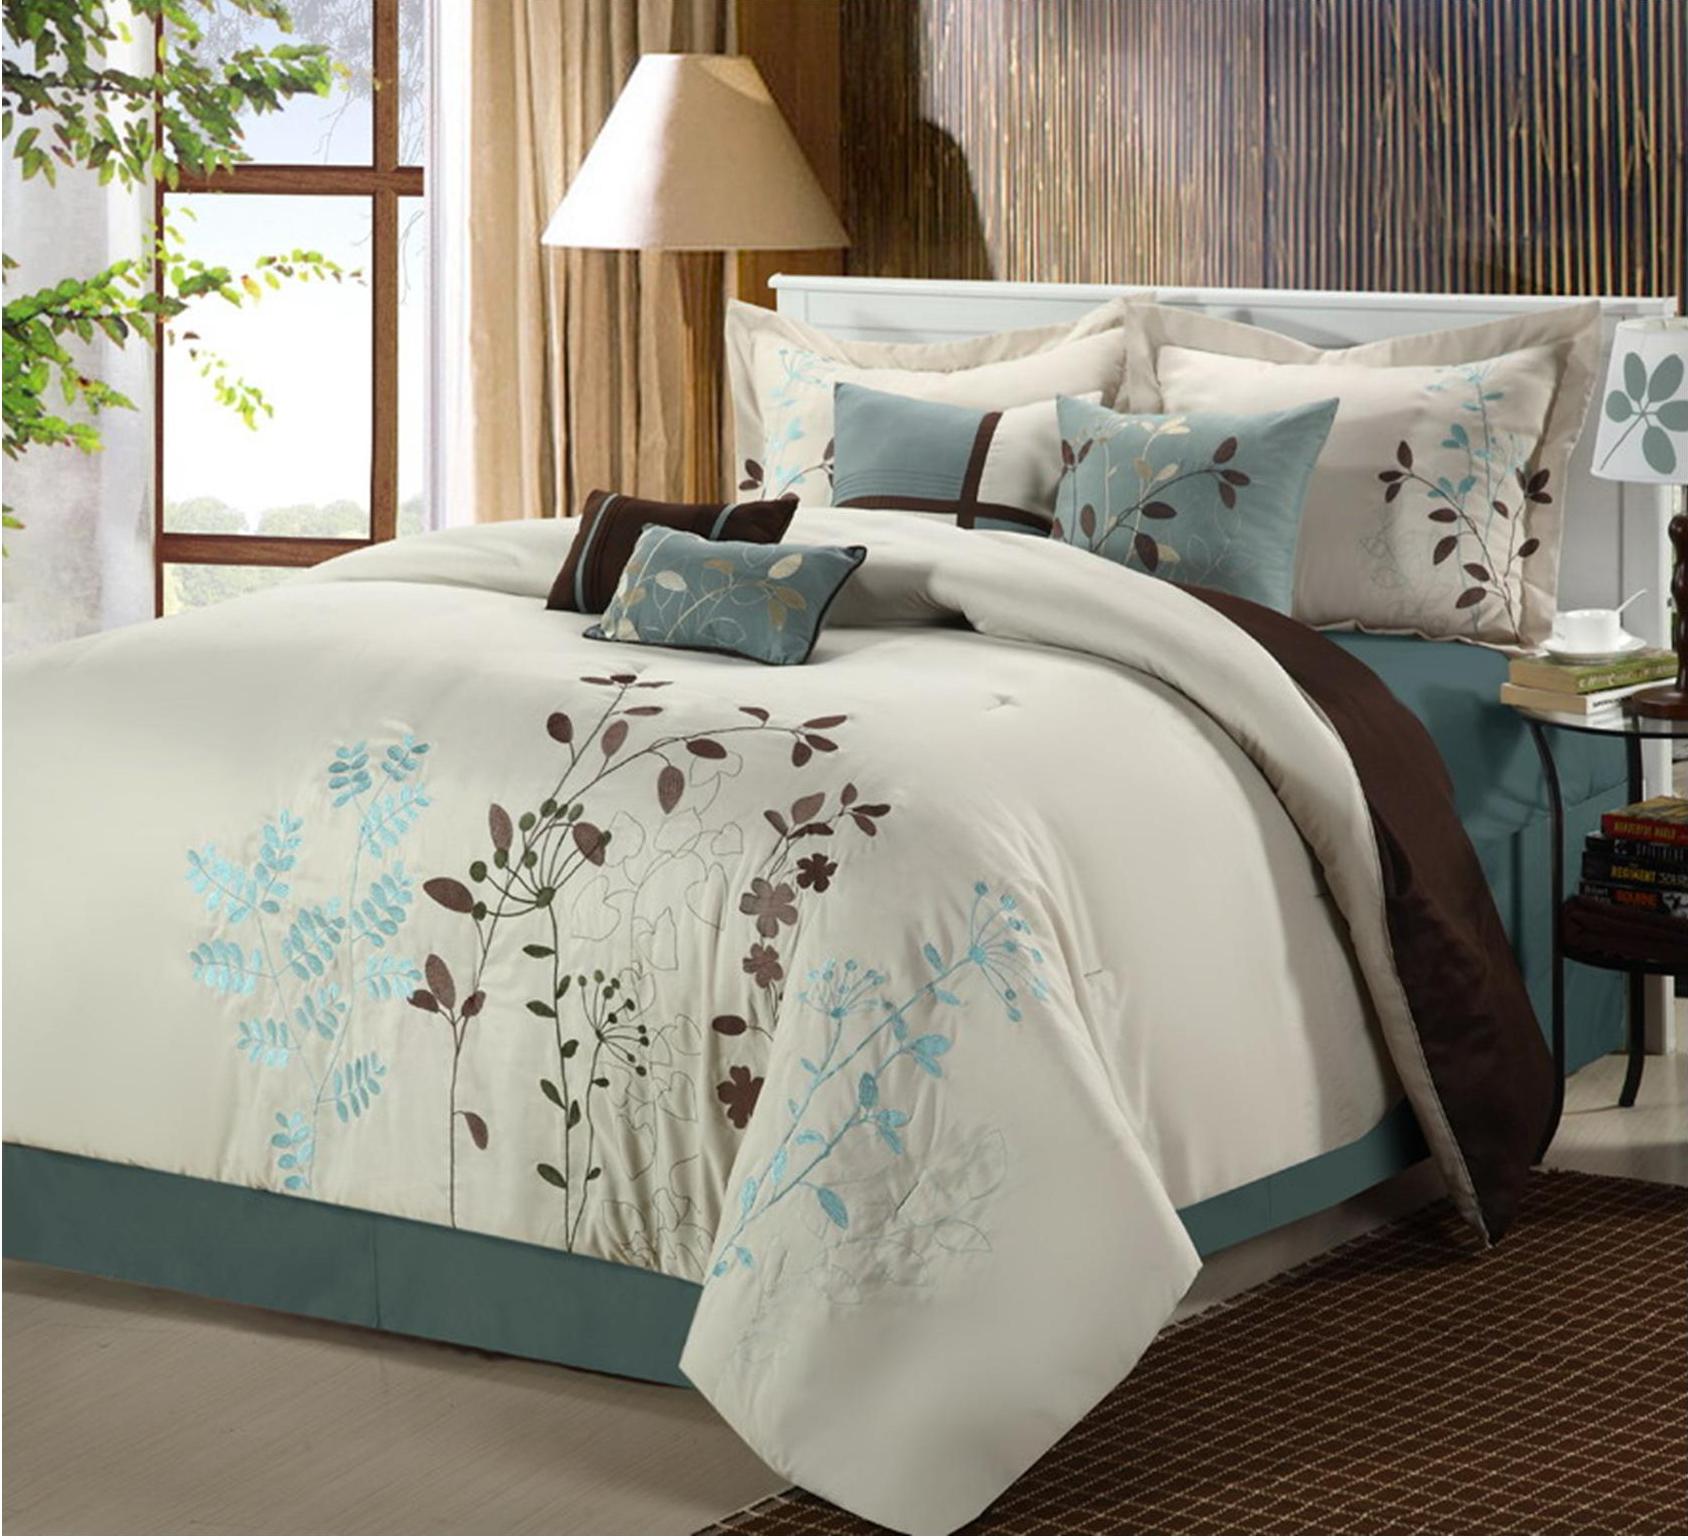 Chic Home Bliss Garden 12 Piece Embroidered Bed in a Bag Comforter Set